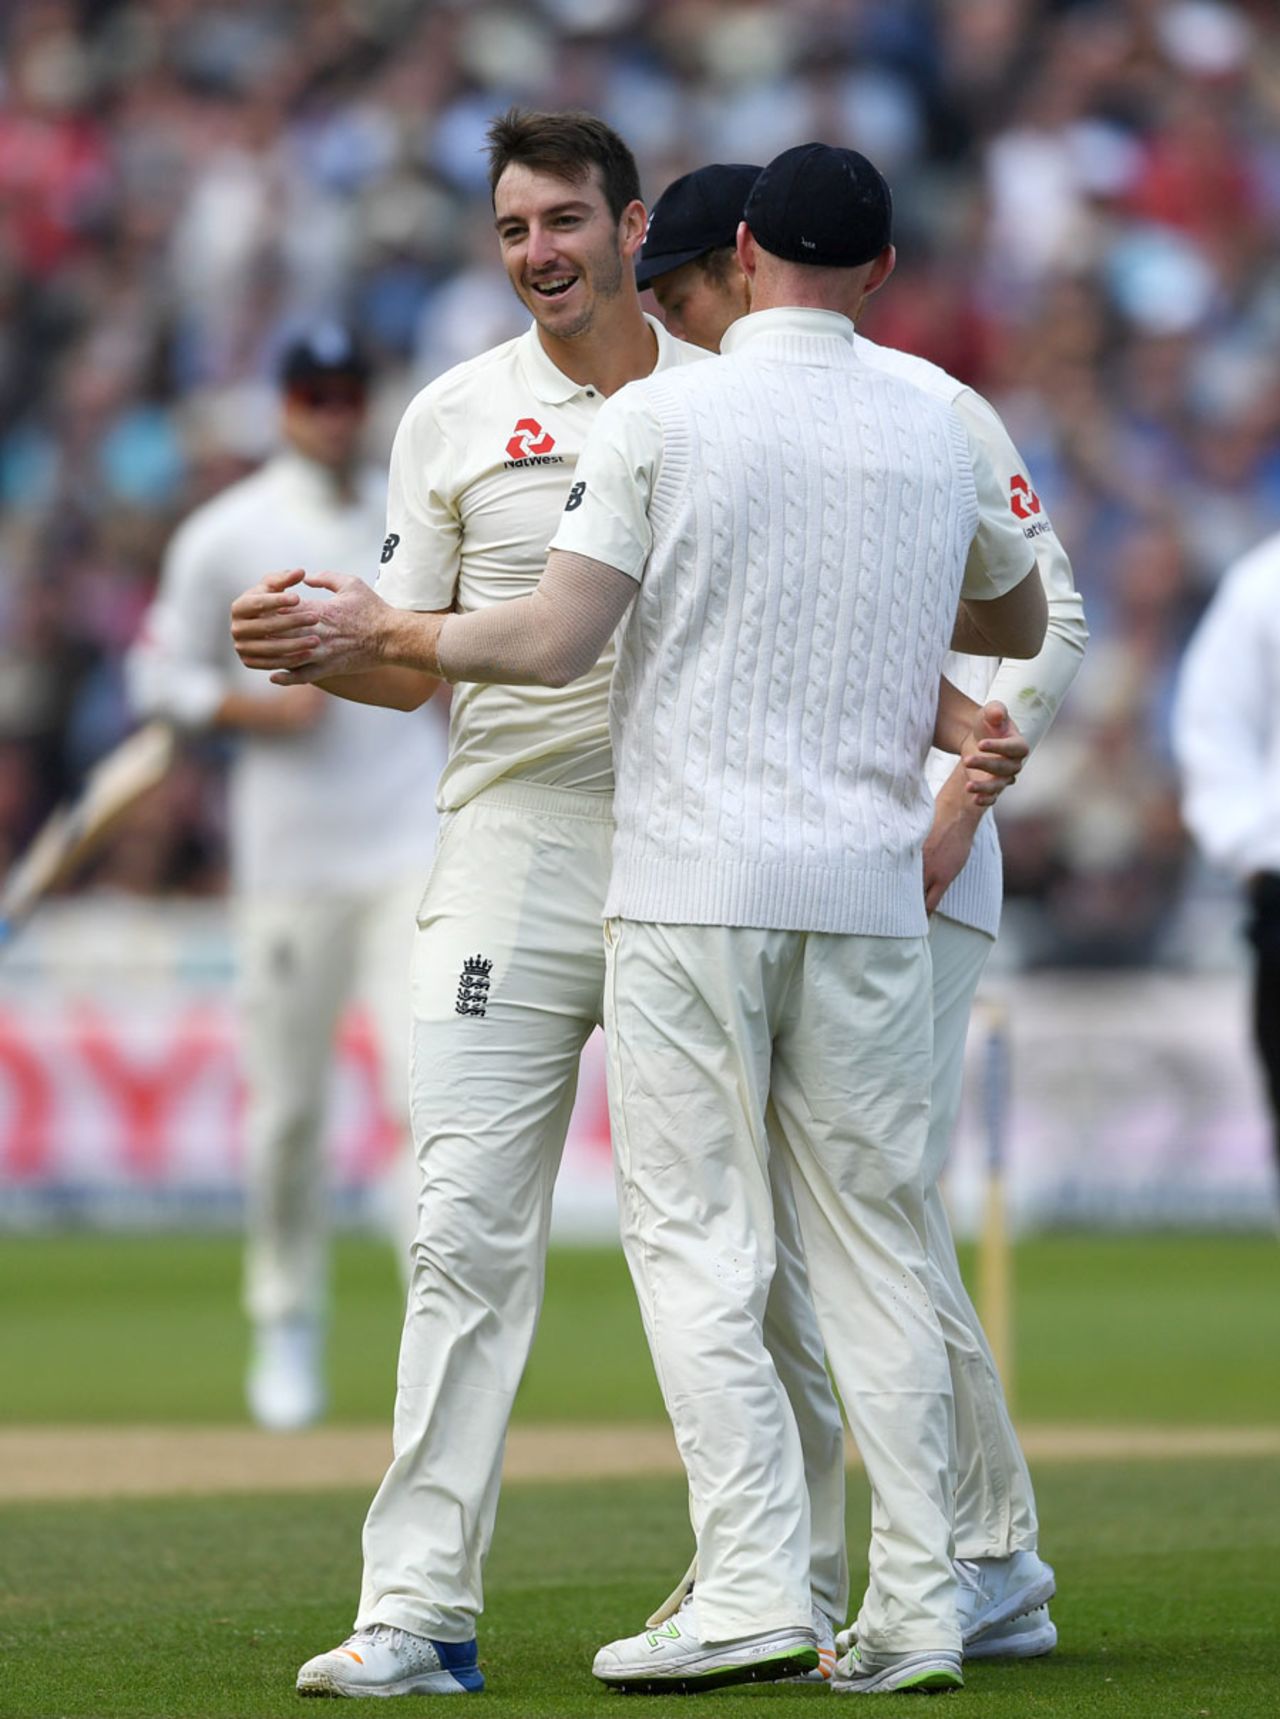 Toby Roland-Jones broke the fifth-wicket stand, England v West Indies, 1st Investec Test, Edgbaston, 3rd day, August 19, 2017